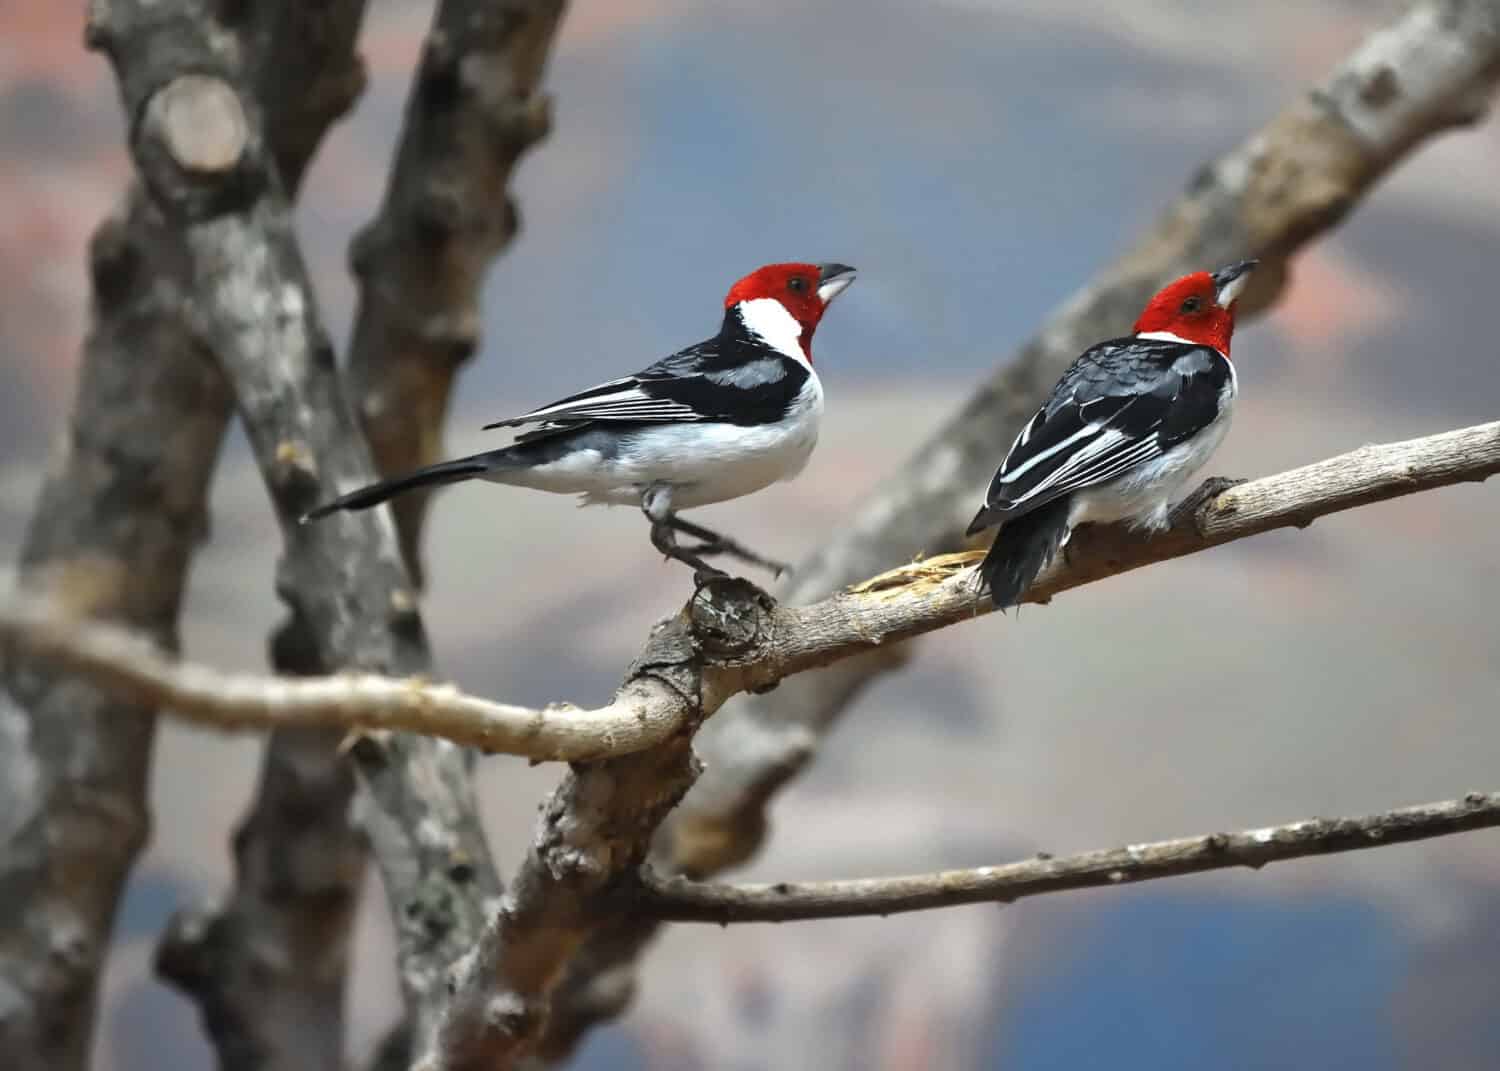 Pair of the Red-cowled cardinals (Paroaria dominicana) sitting on a branch.